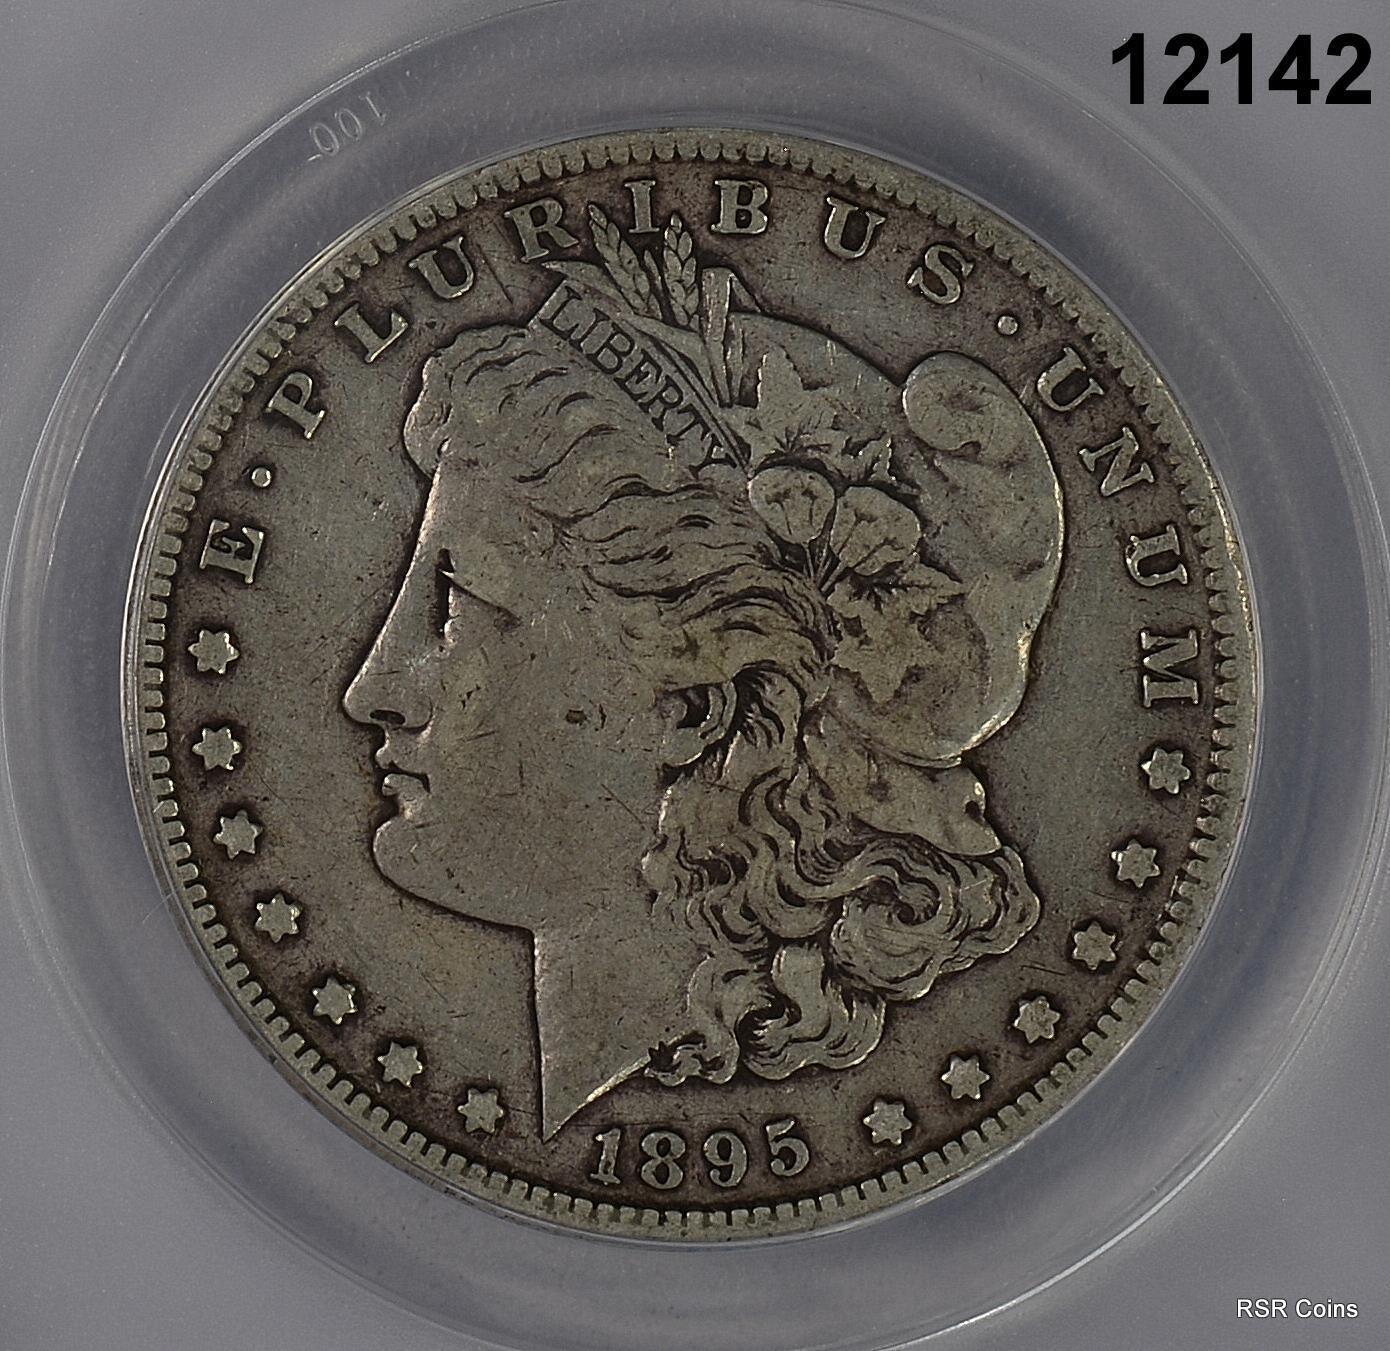 1895 S MORGAN SILVER DOLLAR RARE DATE ANACS CERTIFIED VF20 CLEANED! #12142